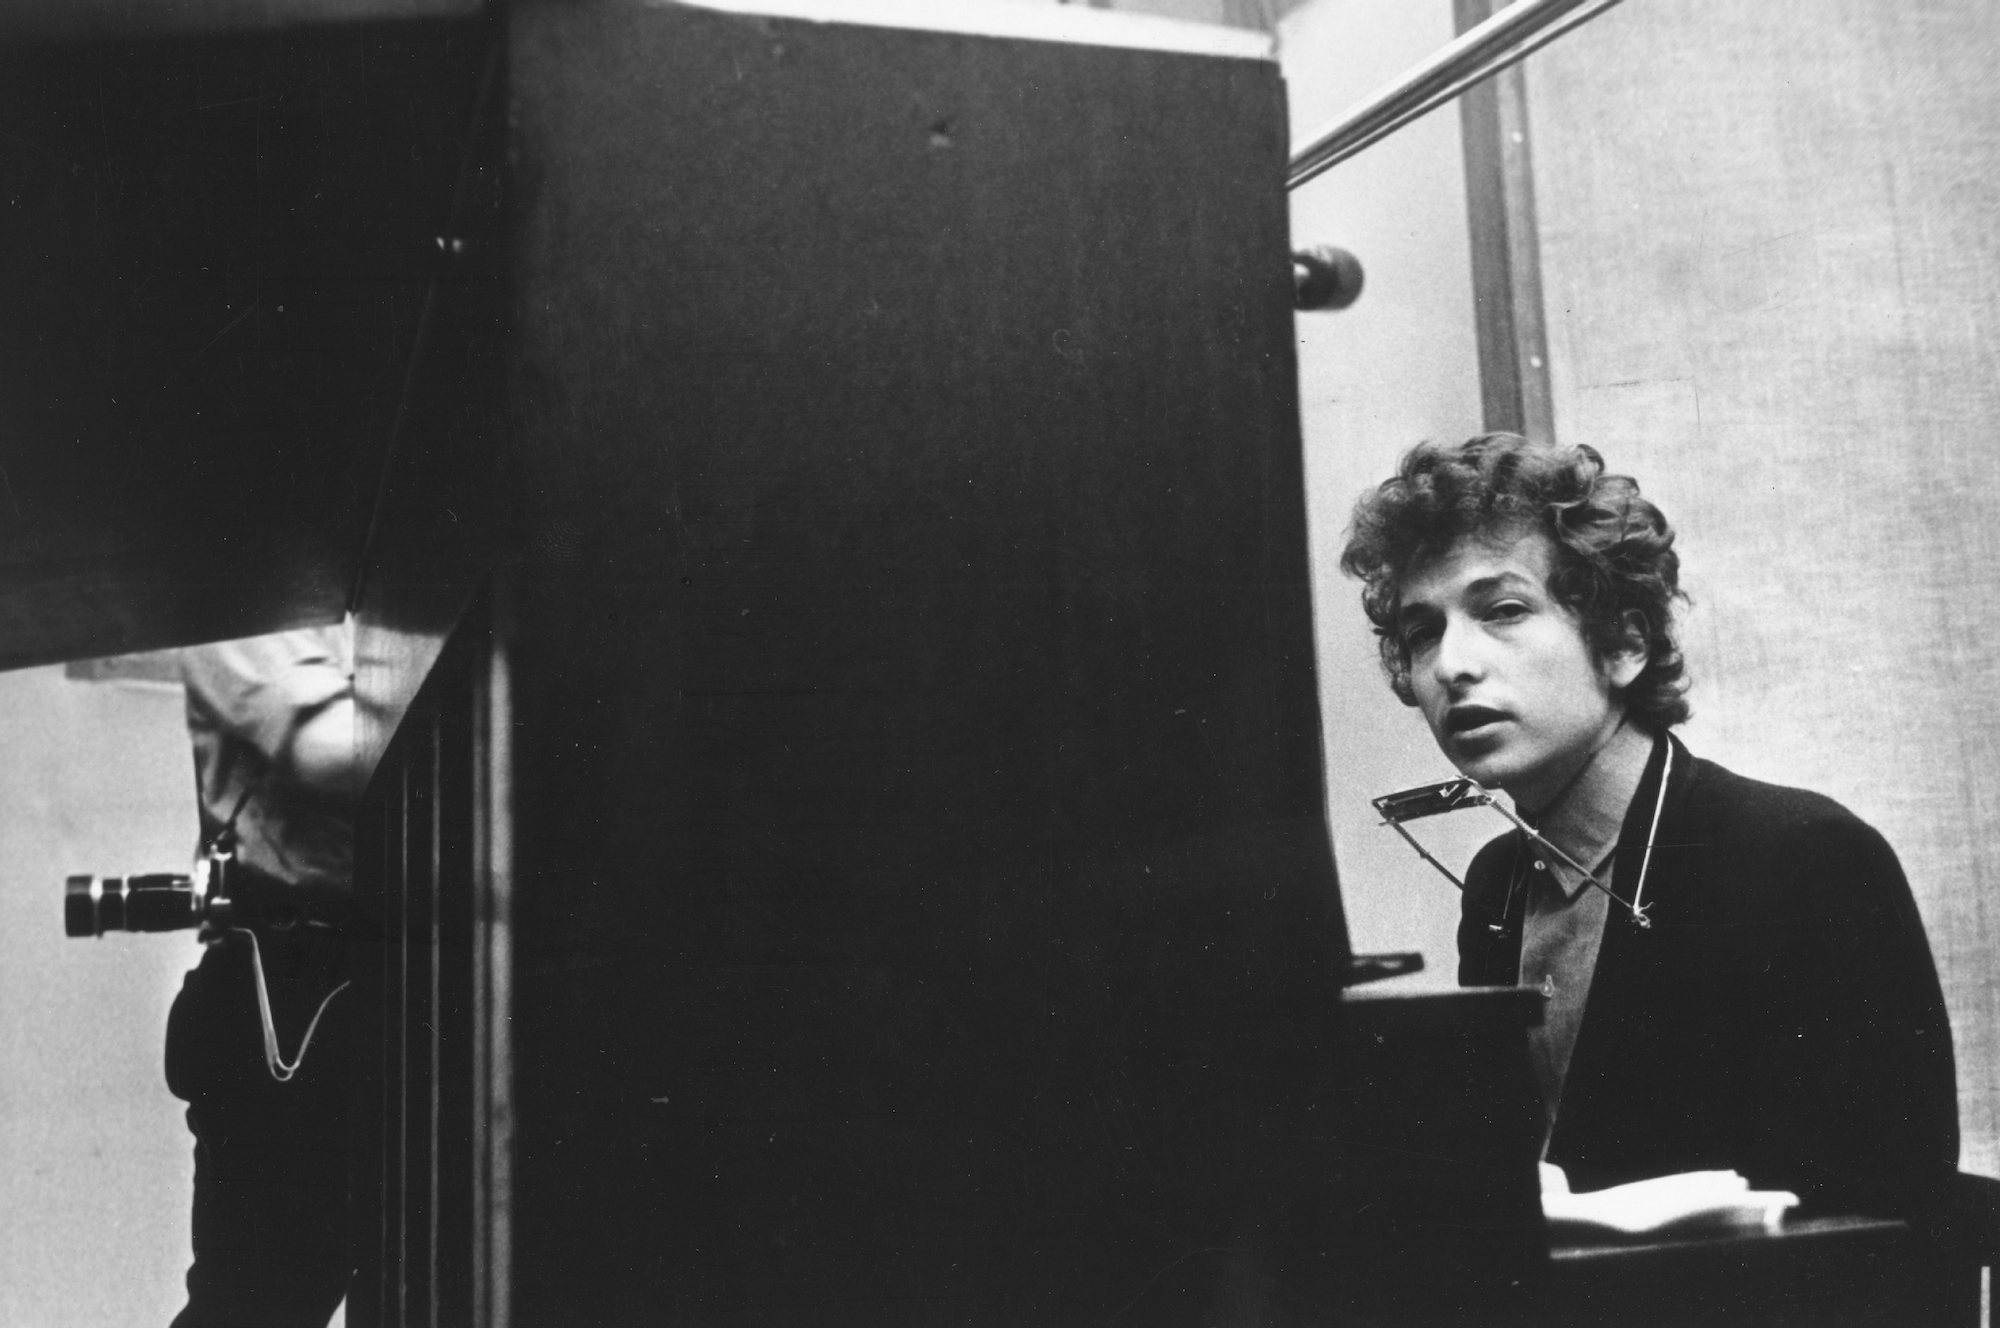 Bob Dylan recording "Highway 61 Revisited" in 1965 